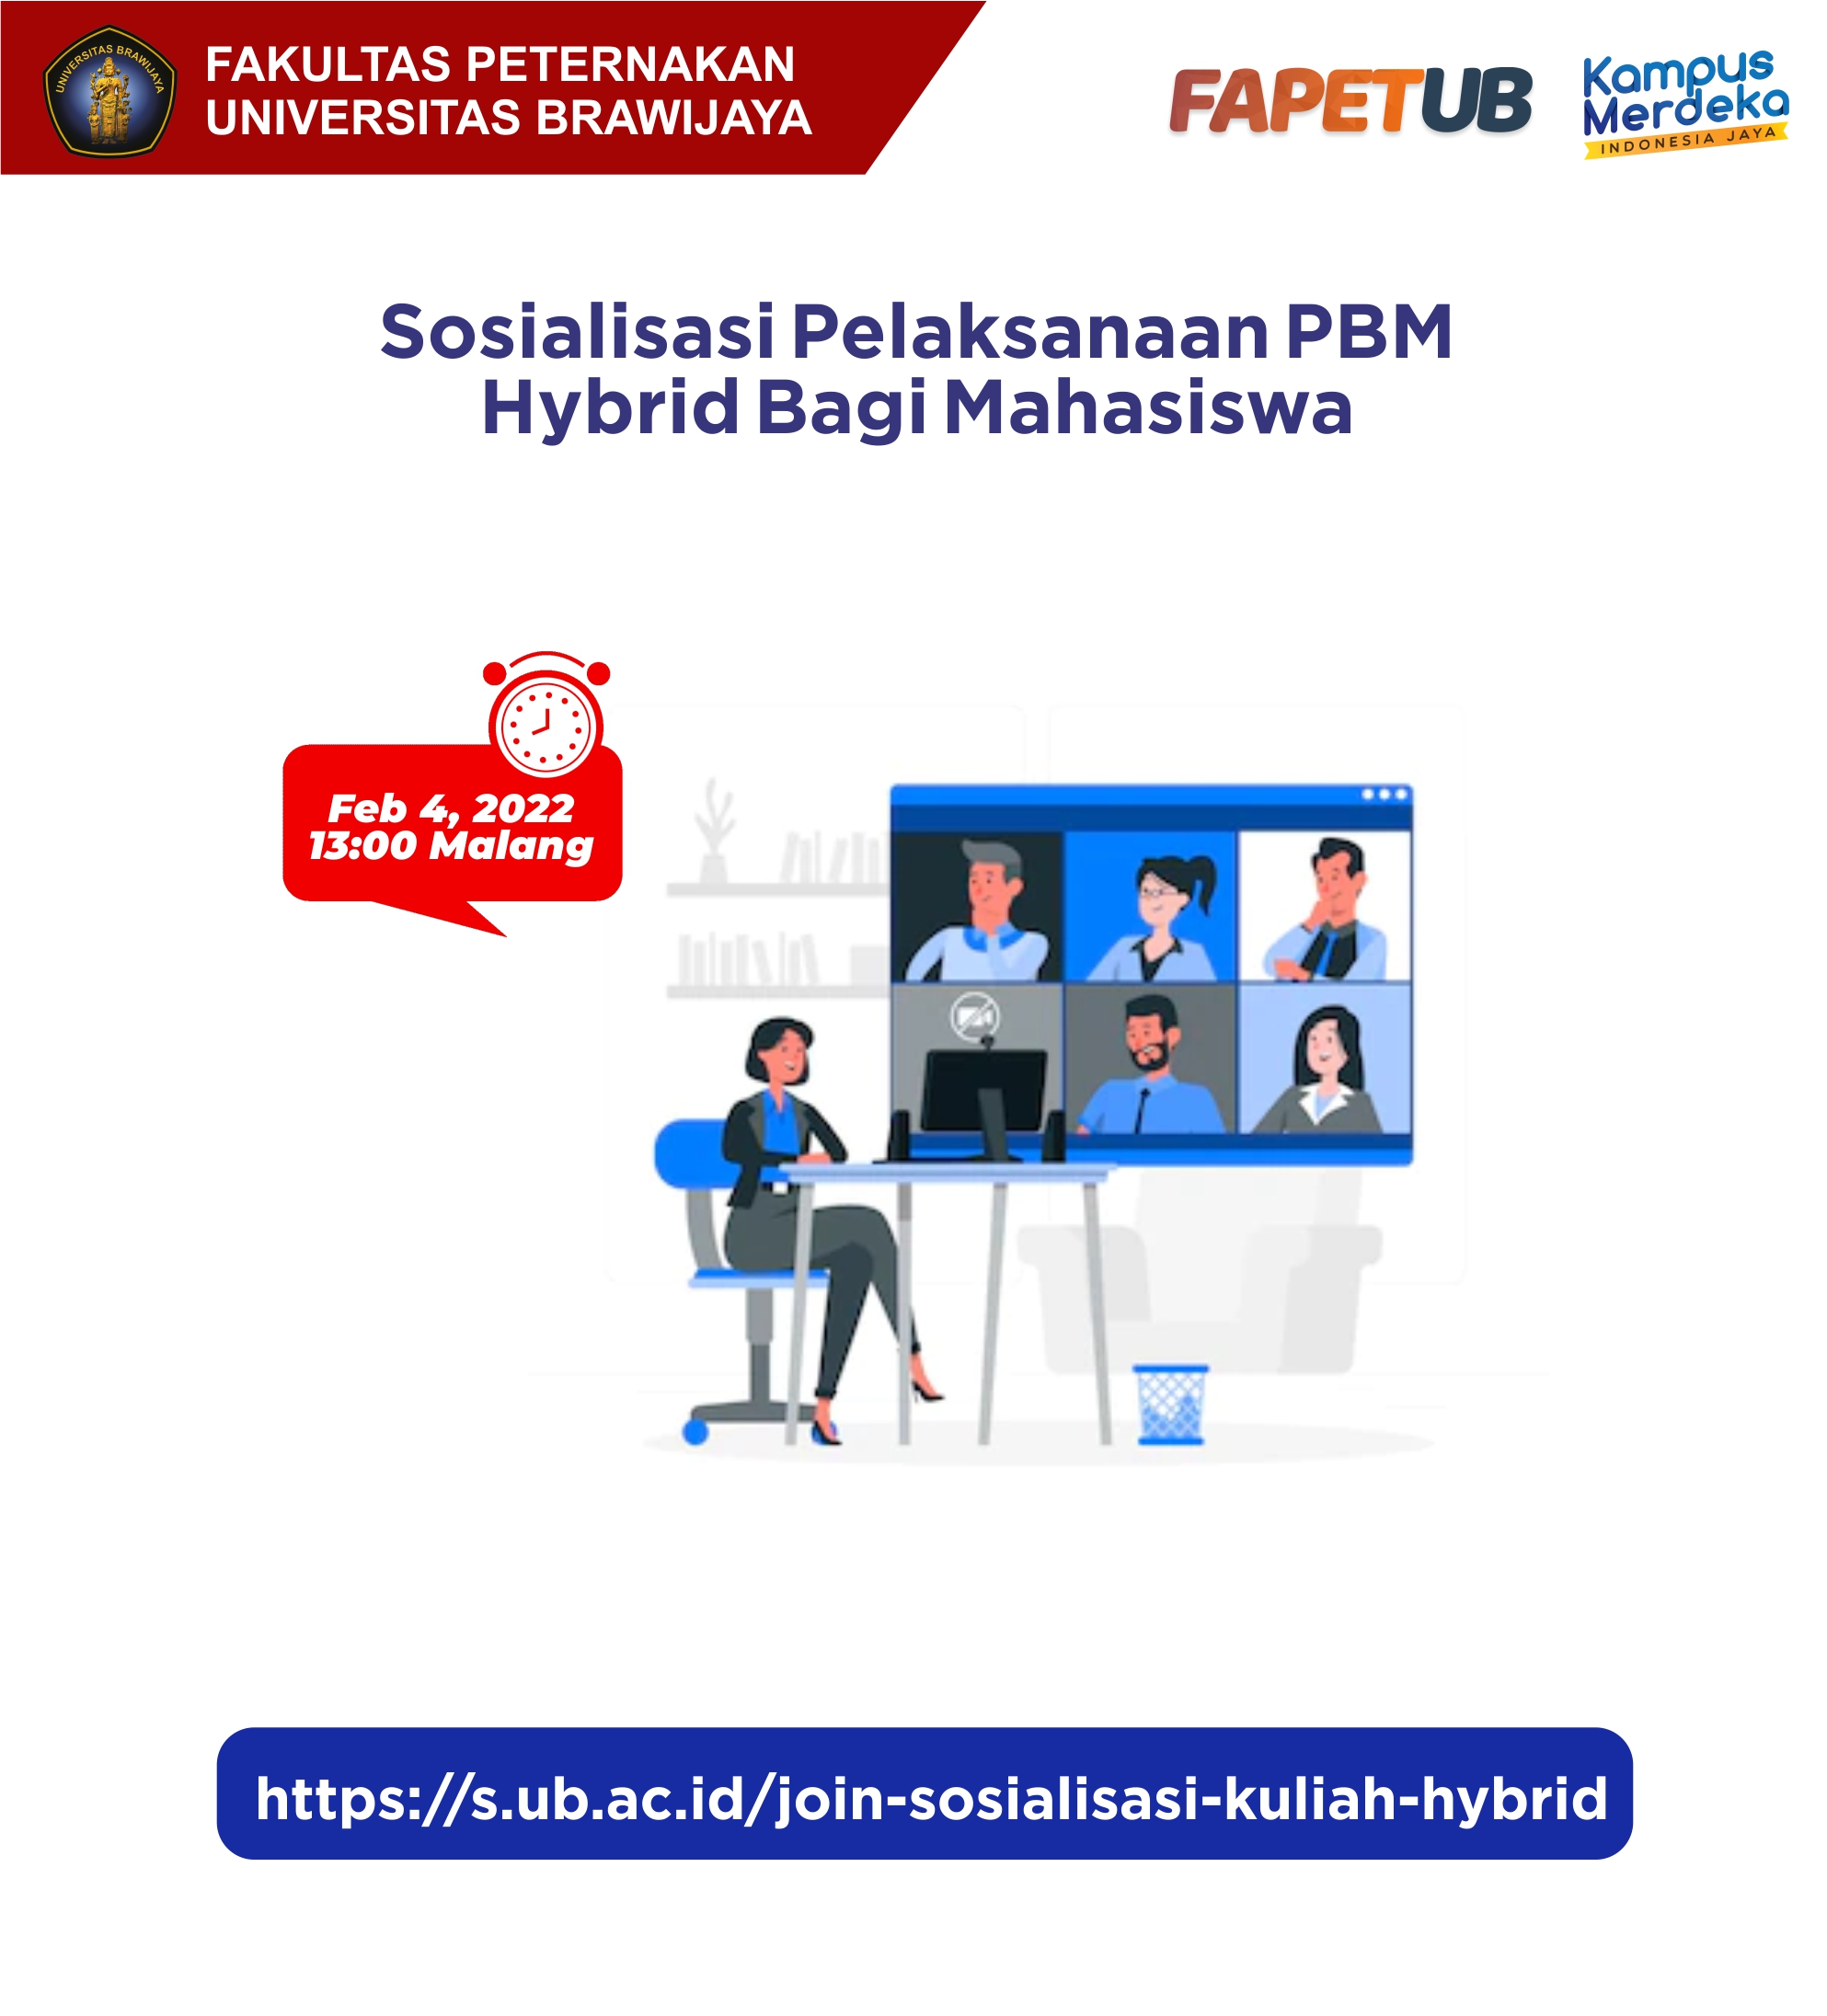 SoSocialization of the implementation of Hybrid PBM for Students